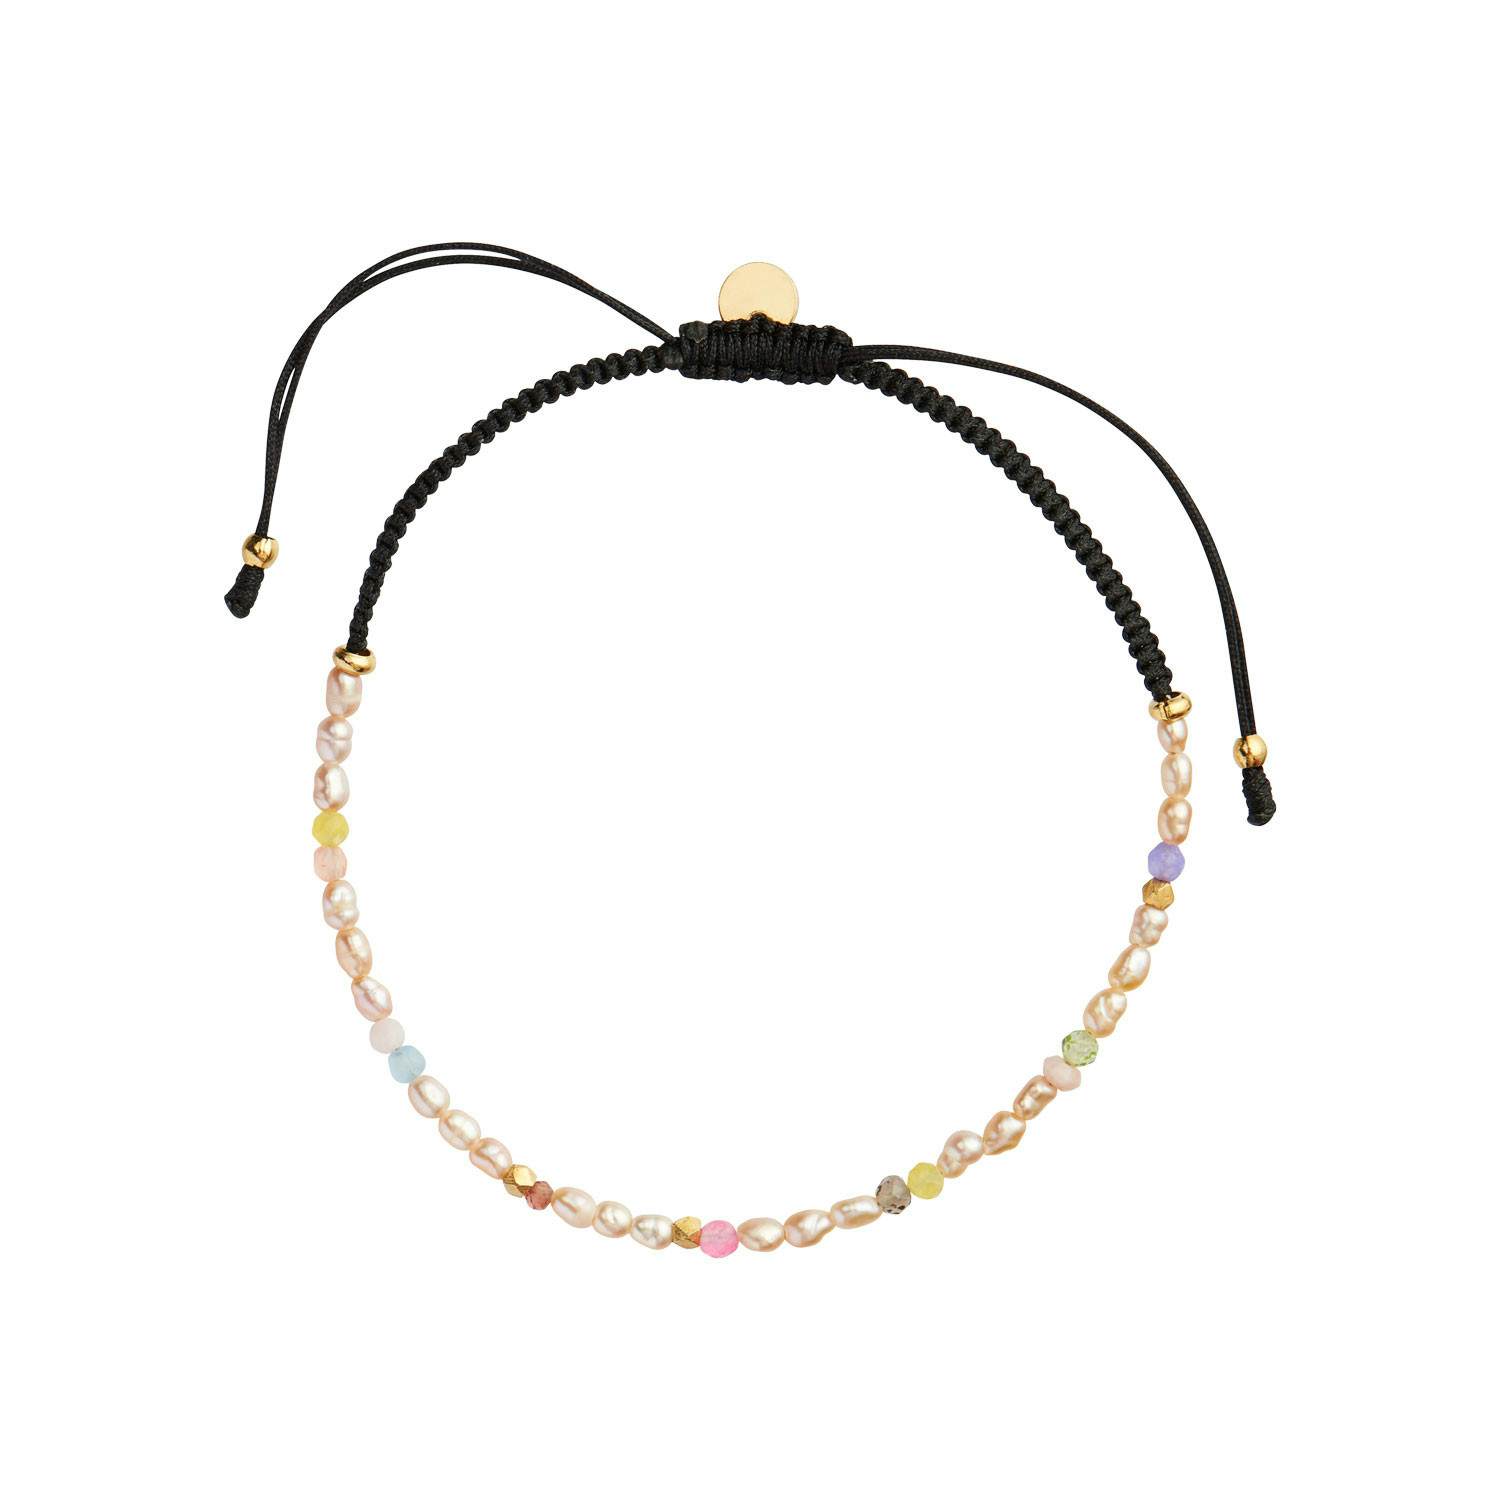 Confetti Pearl Bracelet With Beige And Pastel Mix with Black Ribbon fra STINE A Jewelry i Nylon